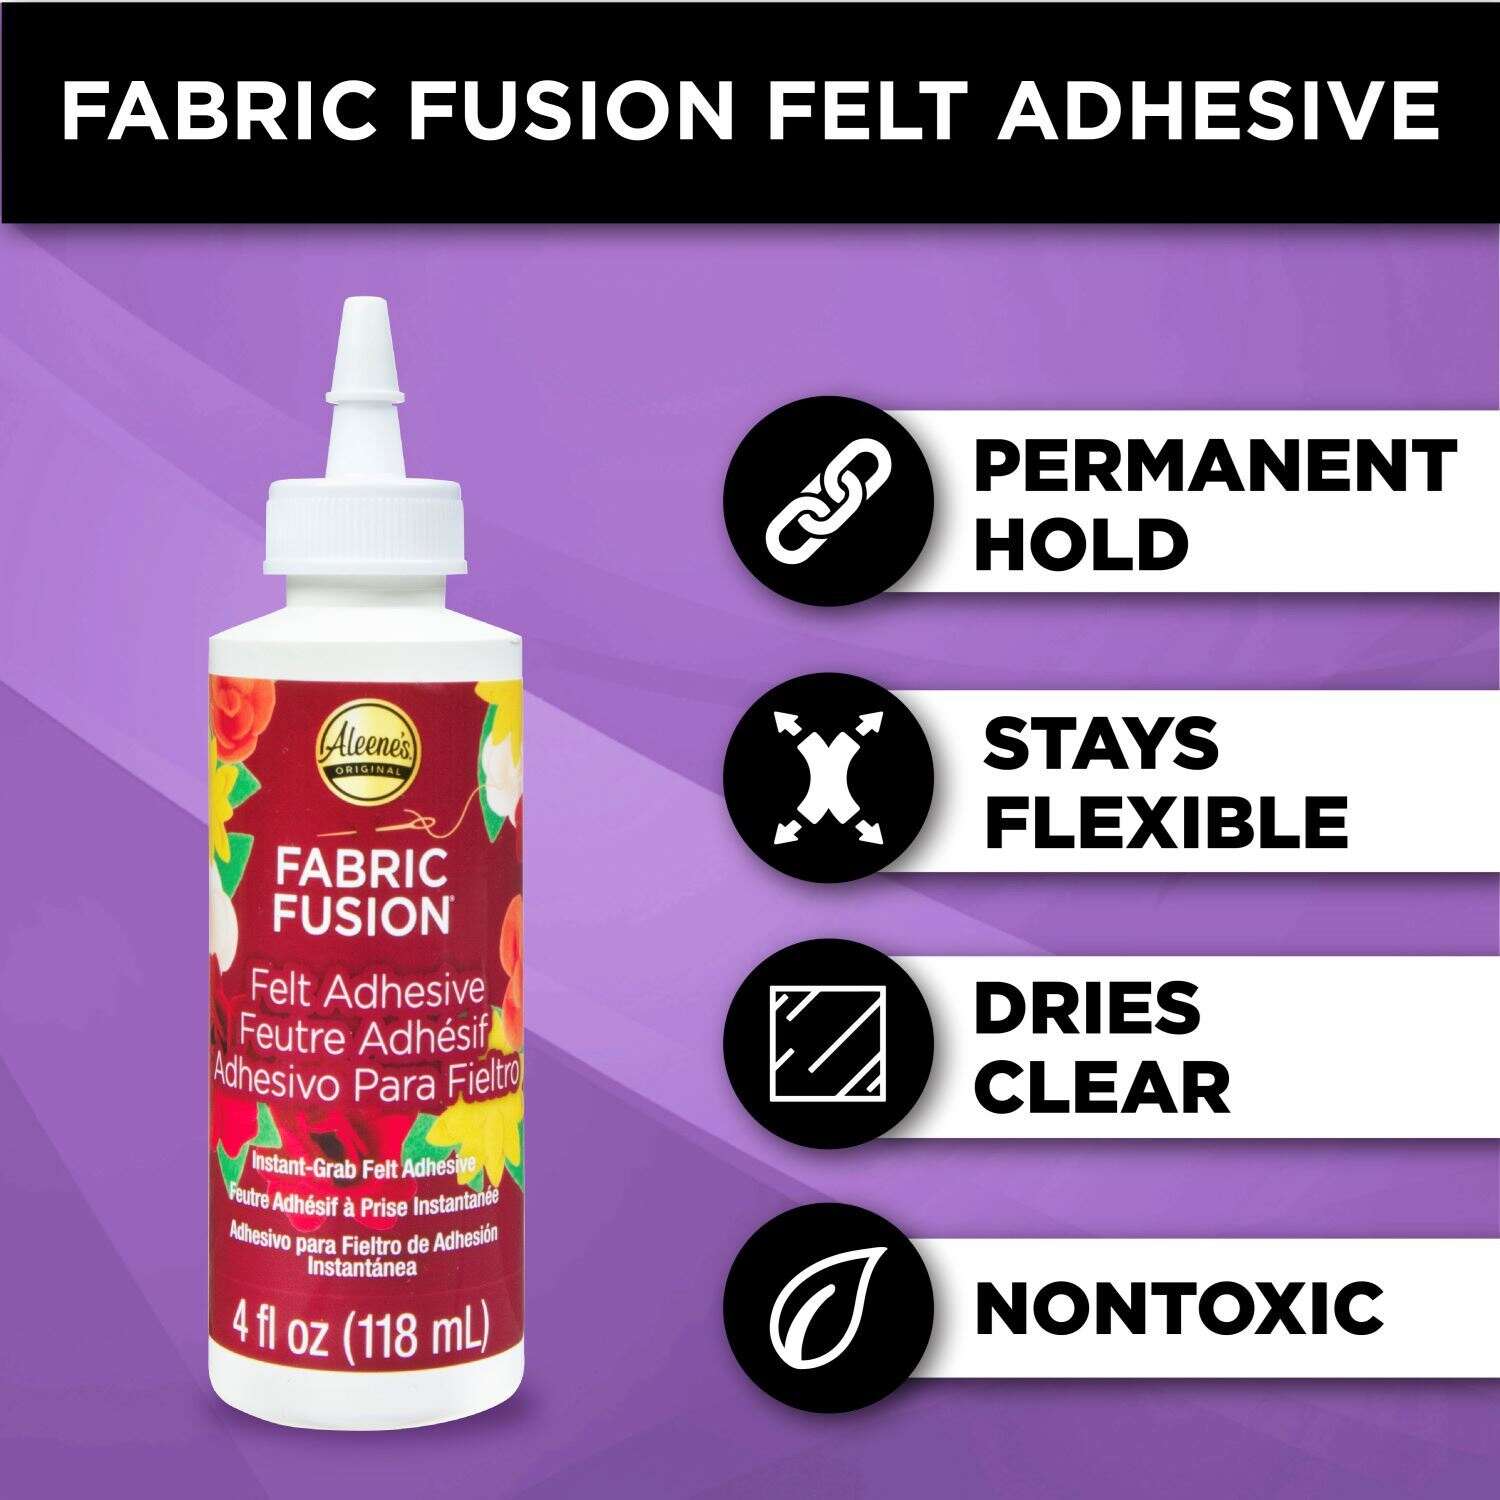 Gras Art Bundles Fabric Fusion Fabric Glue Permanent Clear Washable 4oz for Patches Rug Glue Clothing Glue No Sew Fabric Glue with Pixiss Art Dotting